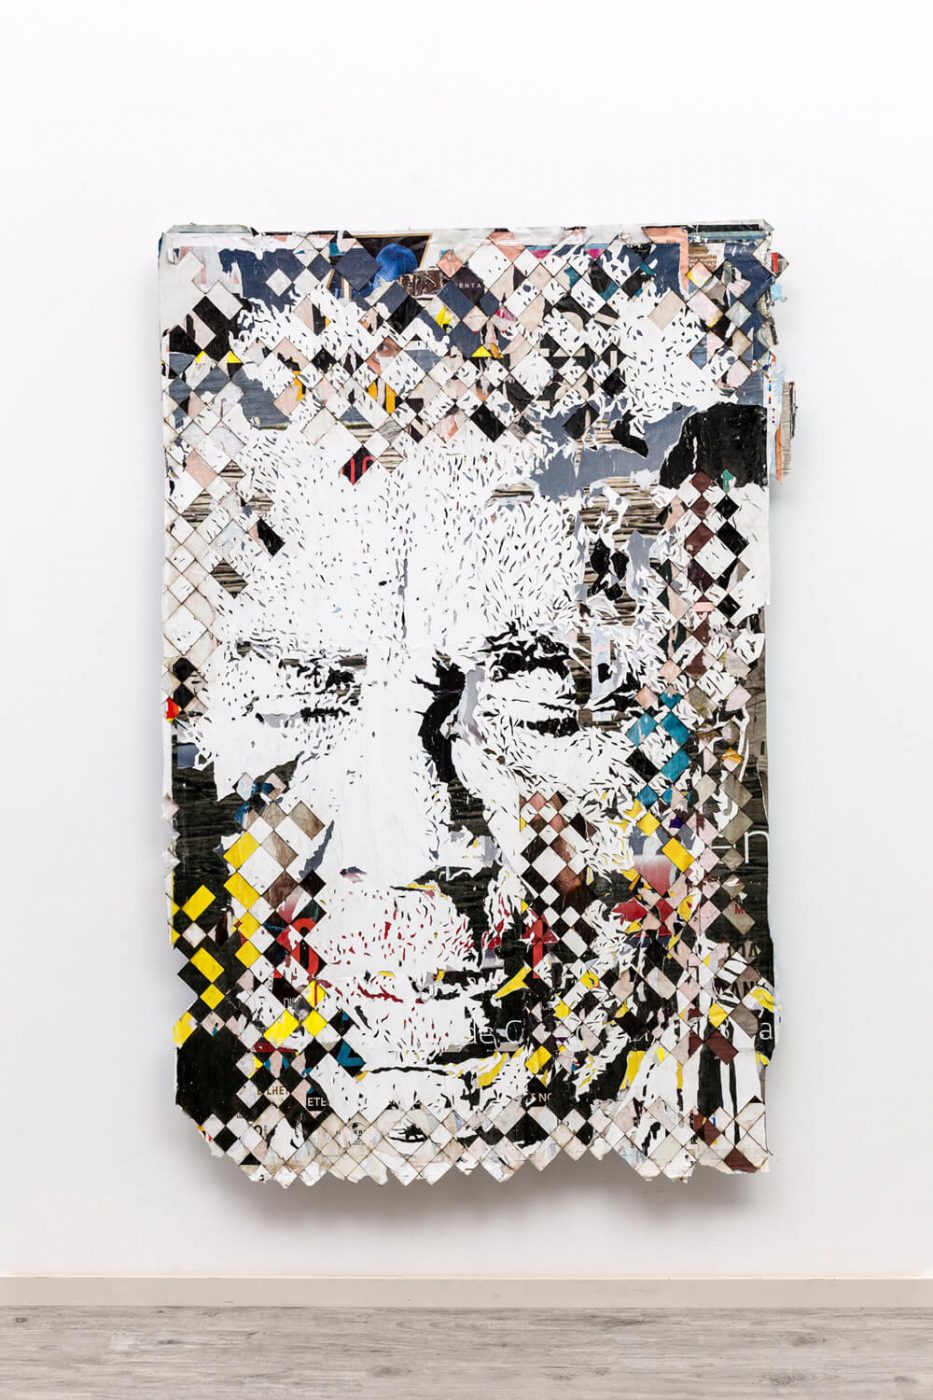 Alexandre Farto aka Vhils, Strata Series #05, 2020. Hand-carved advertising posters.
